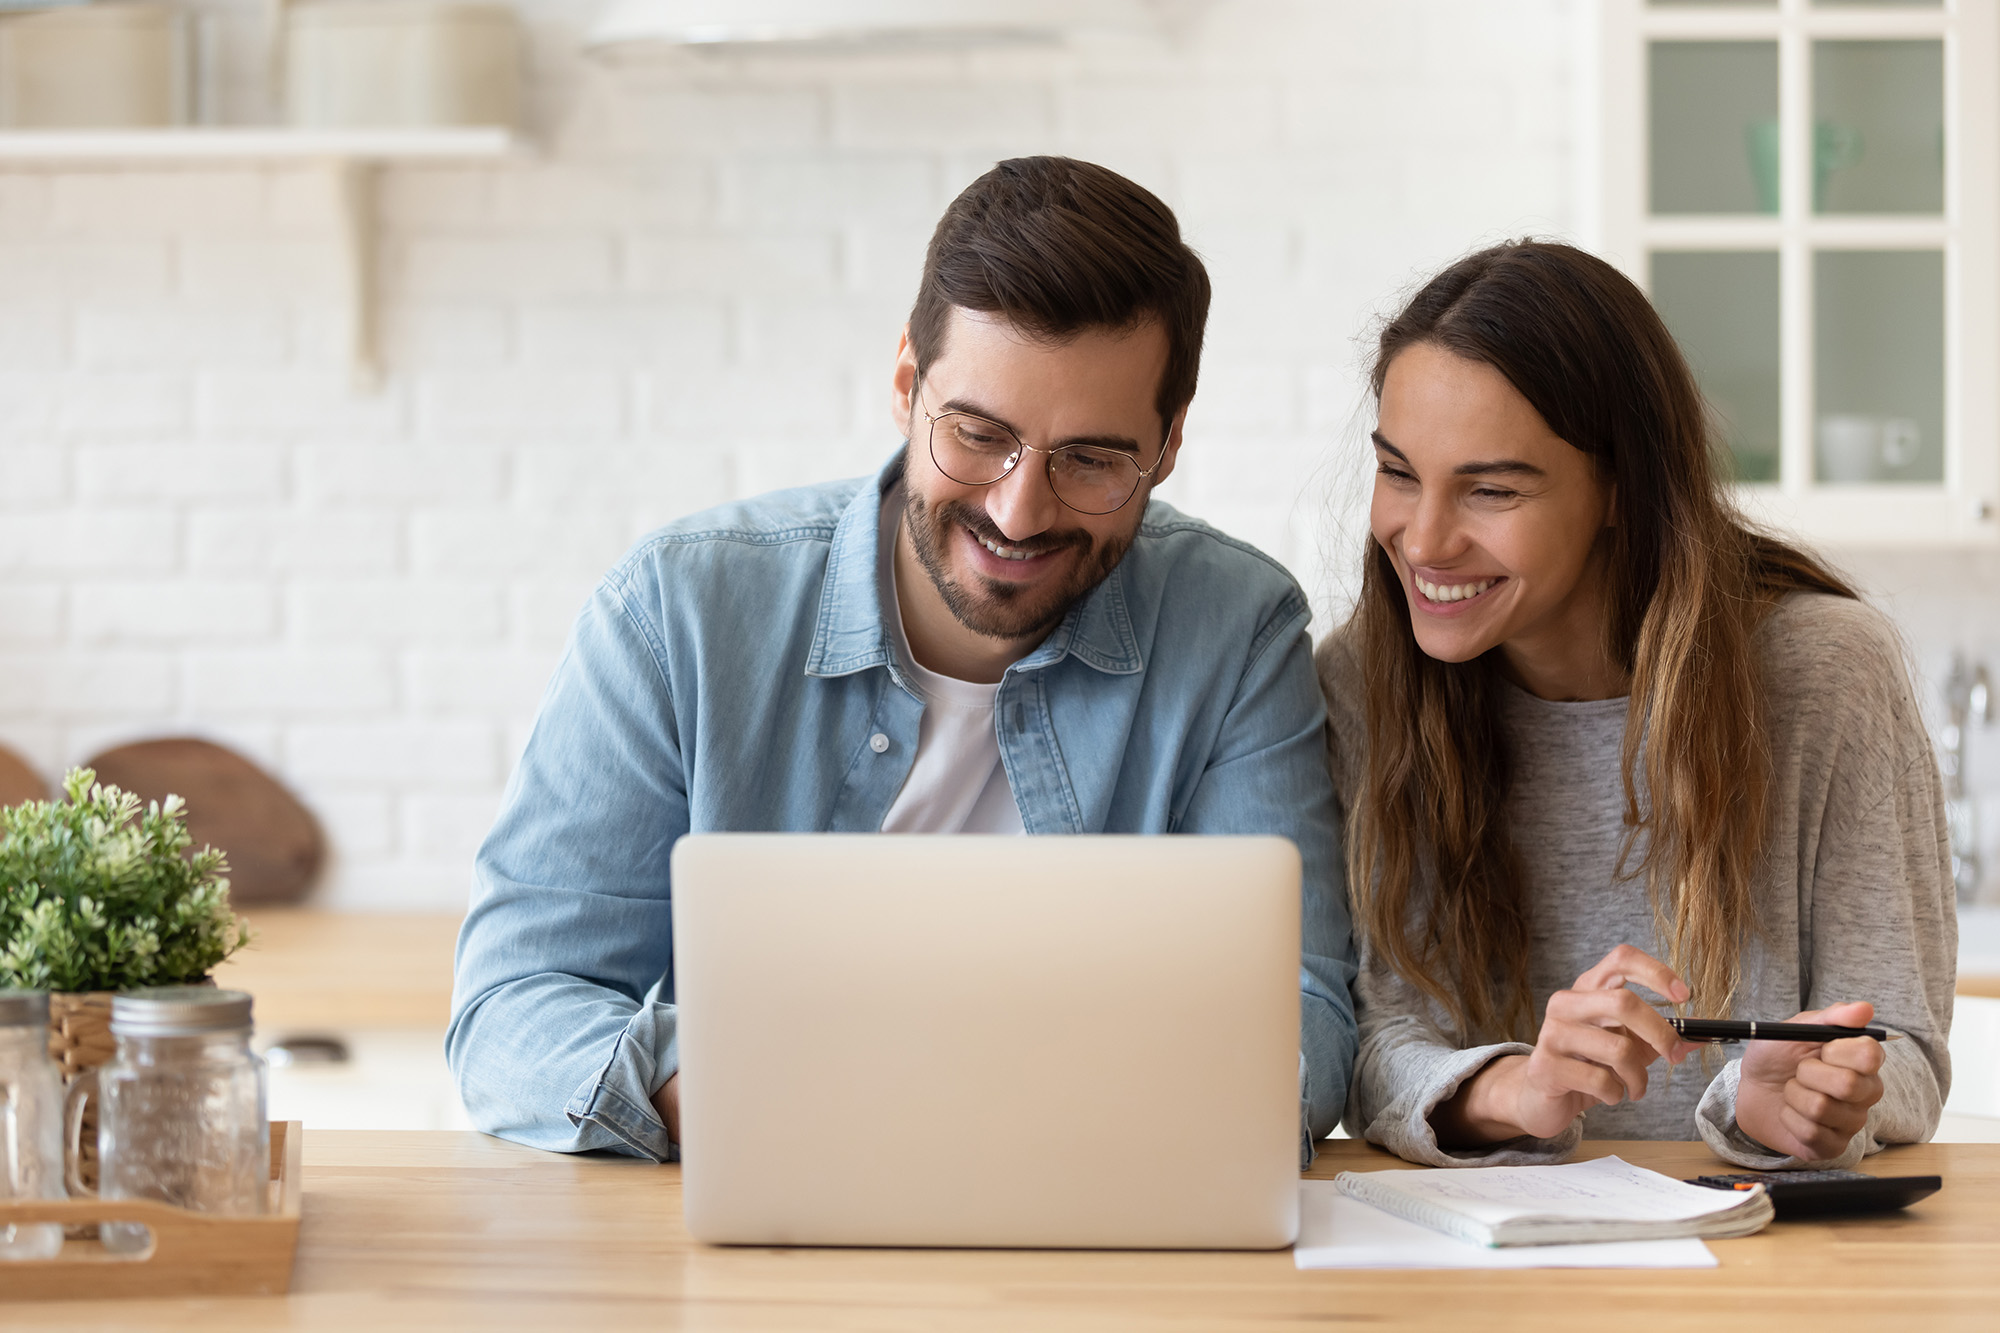 Couple looking at laptop and smiling